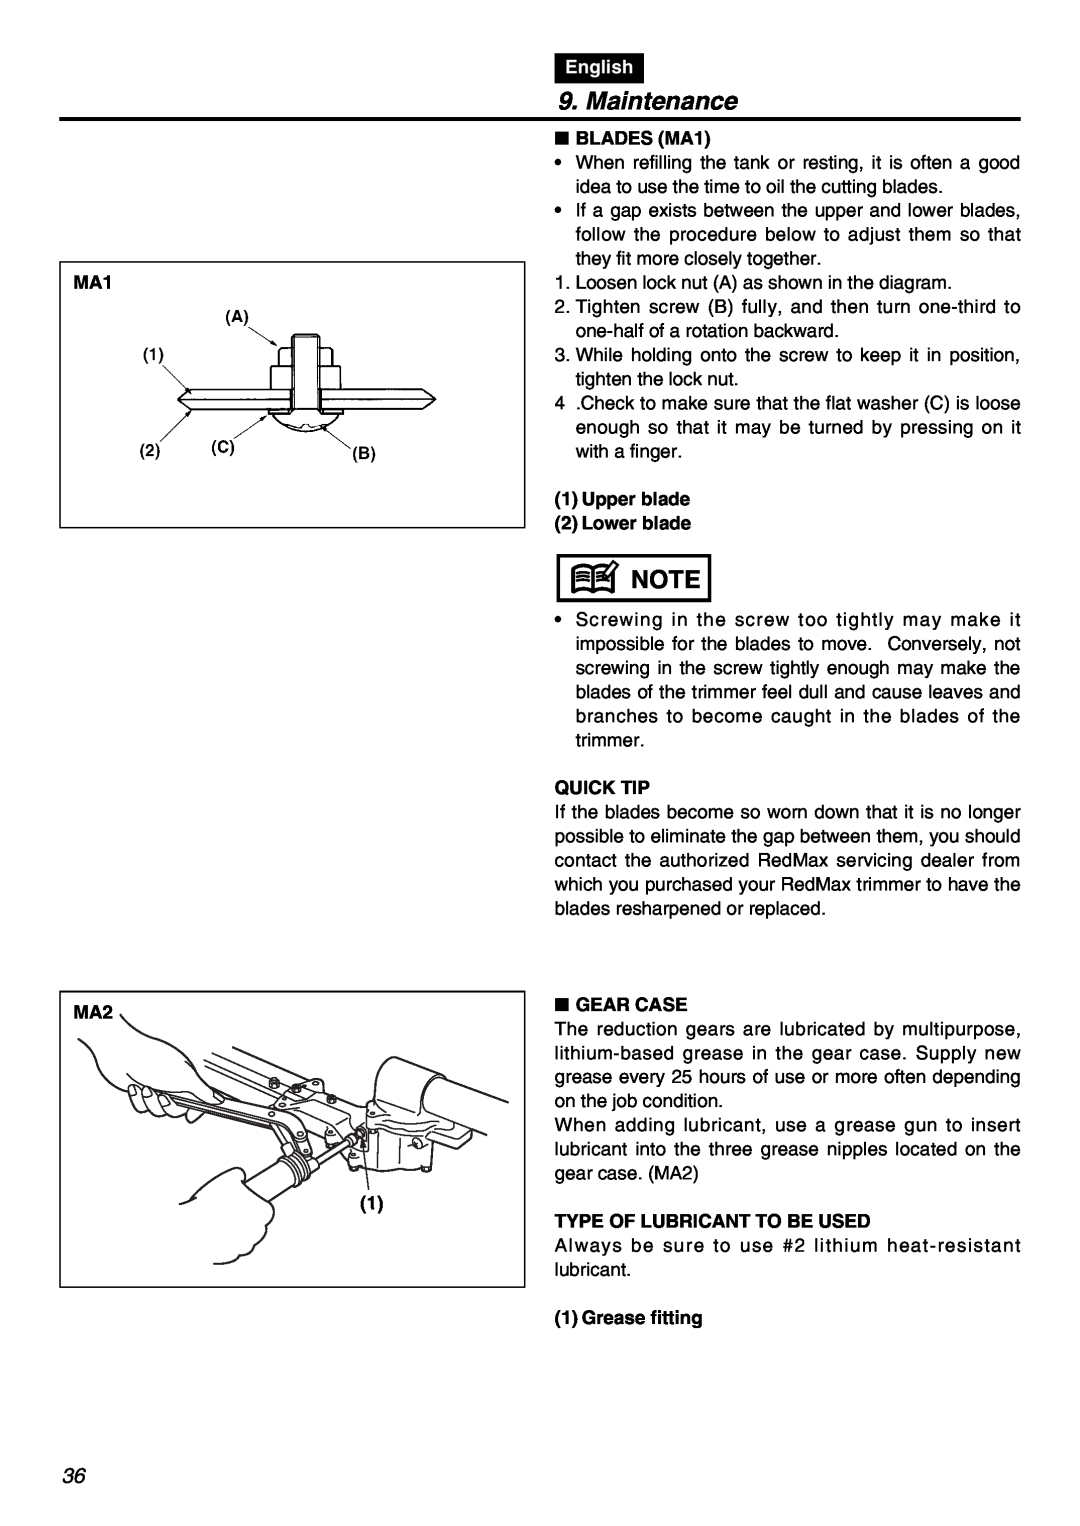 RedMax SRTZ2401F manual Maintenance, English, BLADES MA1, Upper blade 2 Lower blade, Quick Tip, Gear Case, Grease fitting 